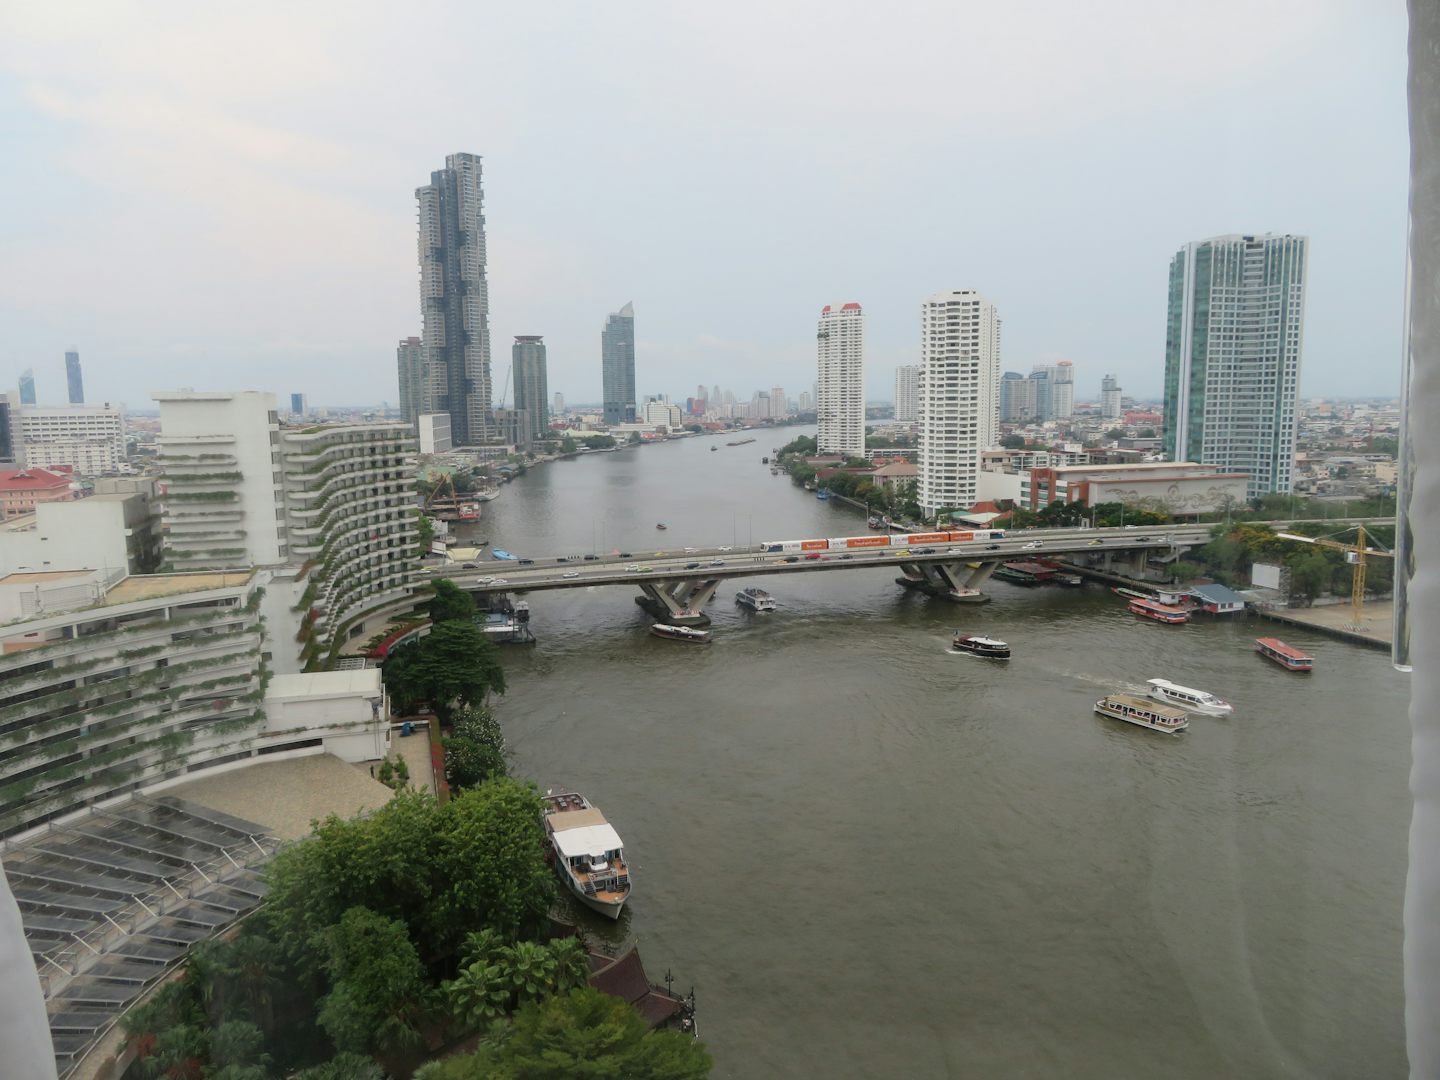 View from our Window at the Shangri-La in Bangkok. Beautiful!  